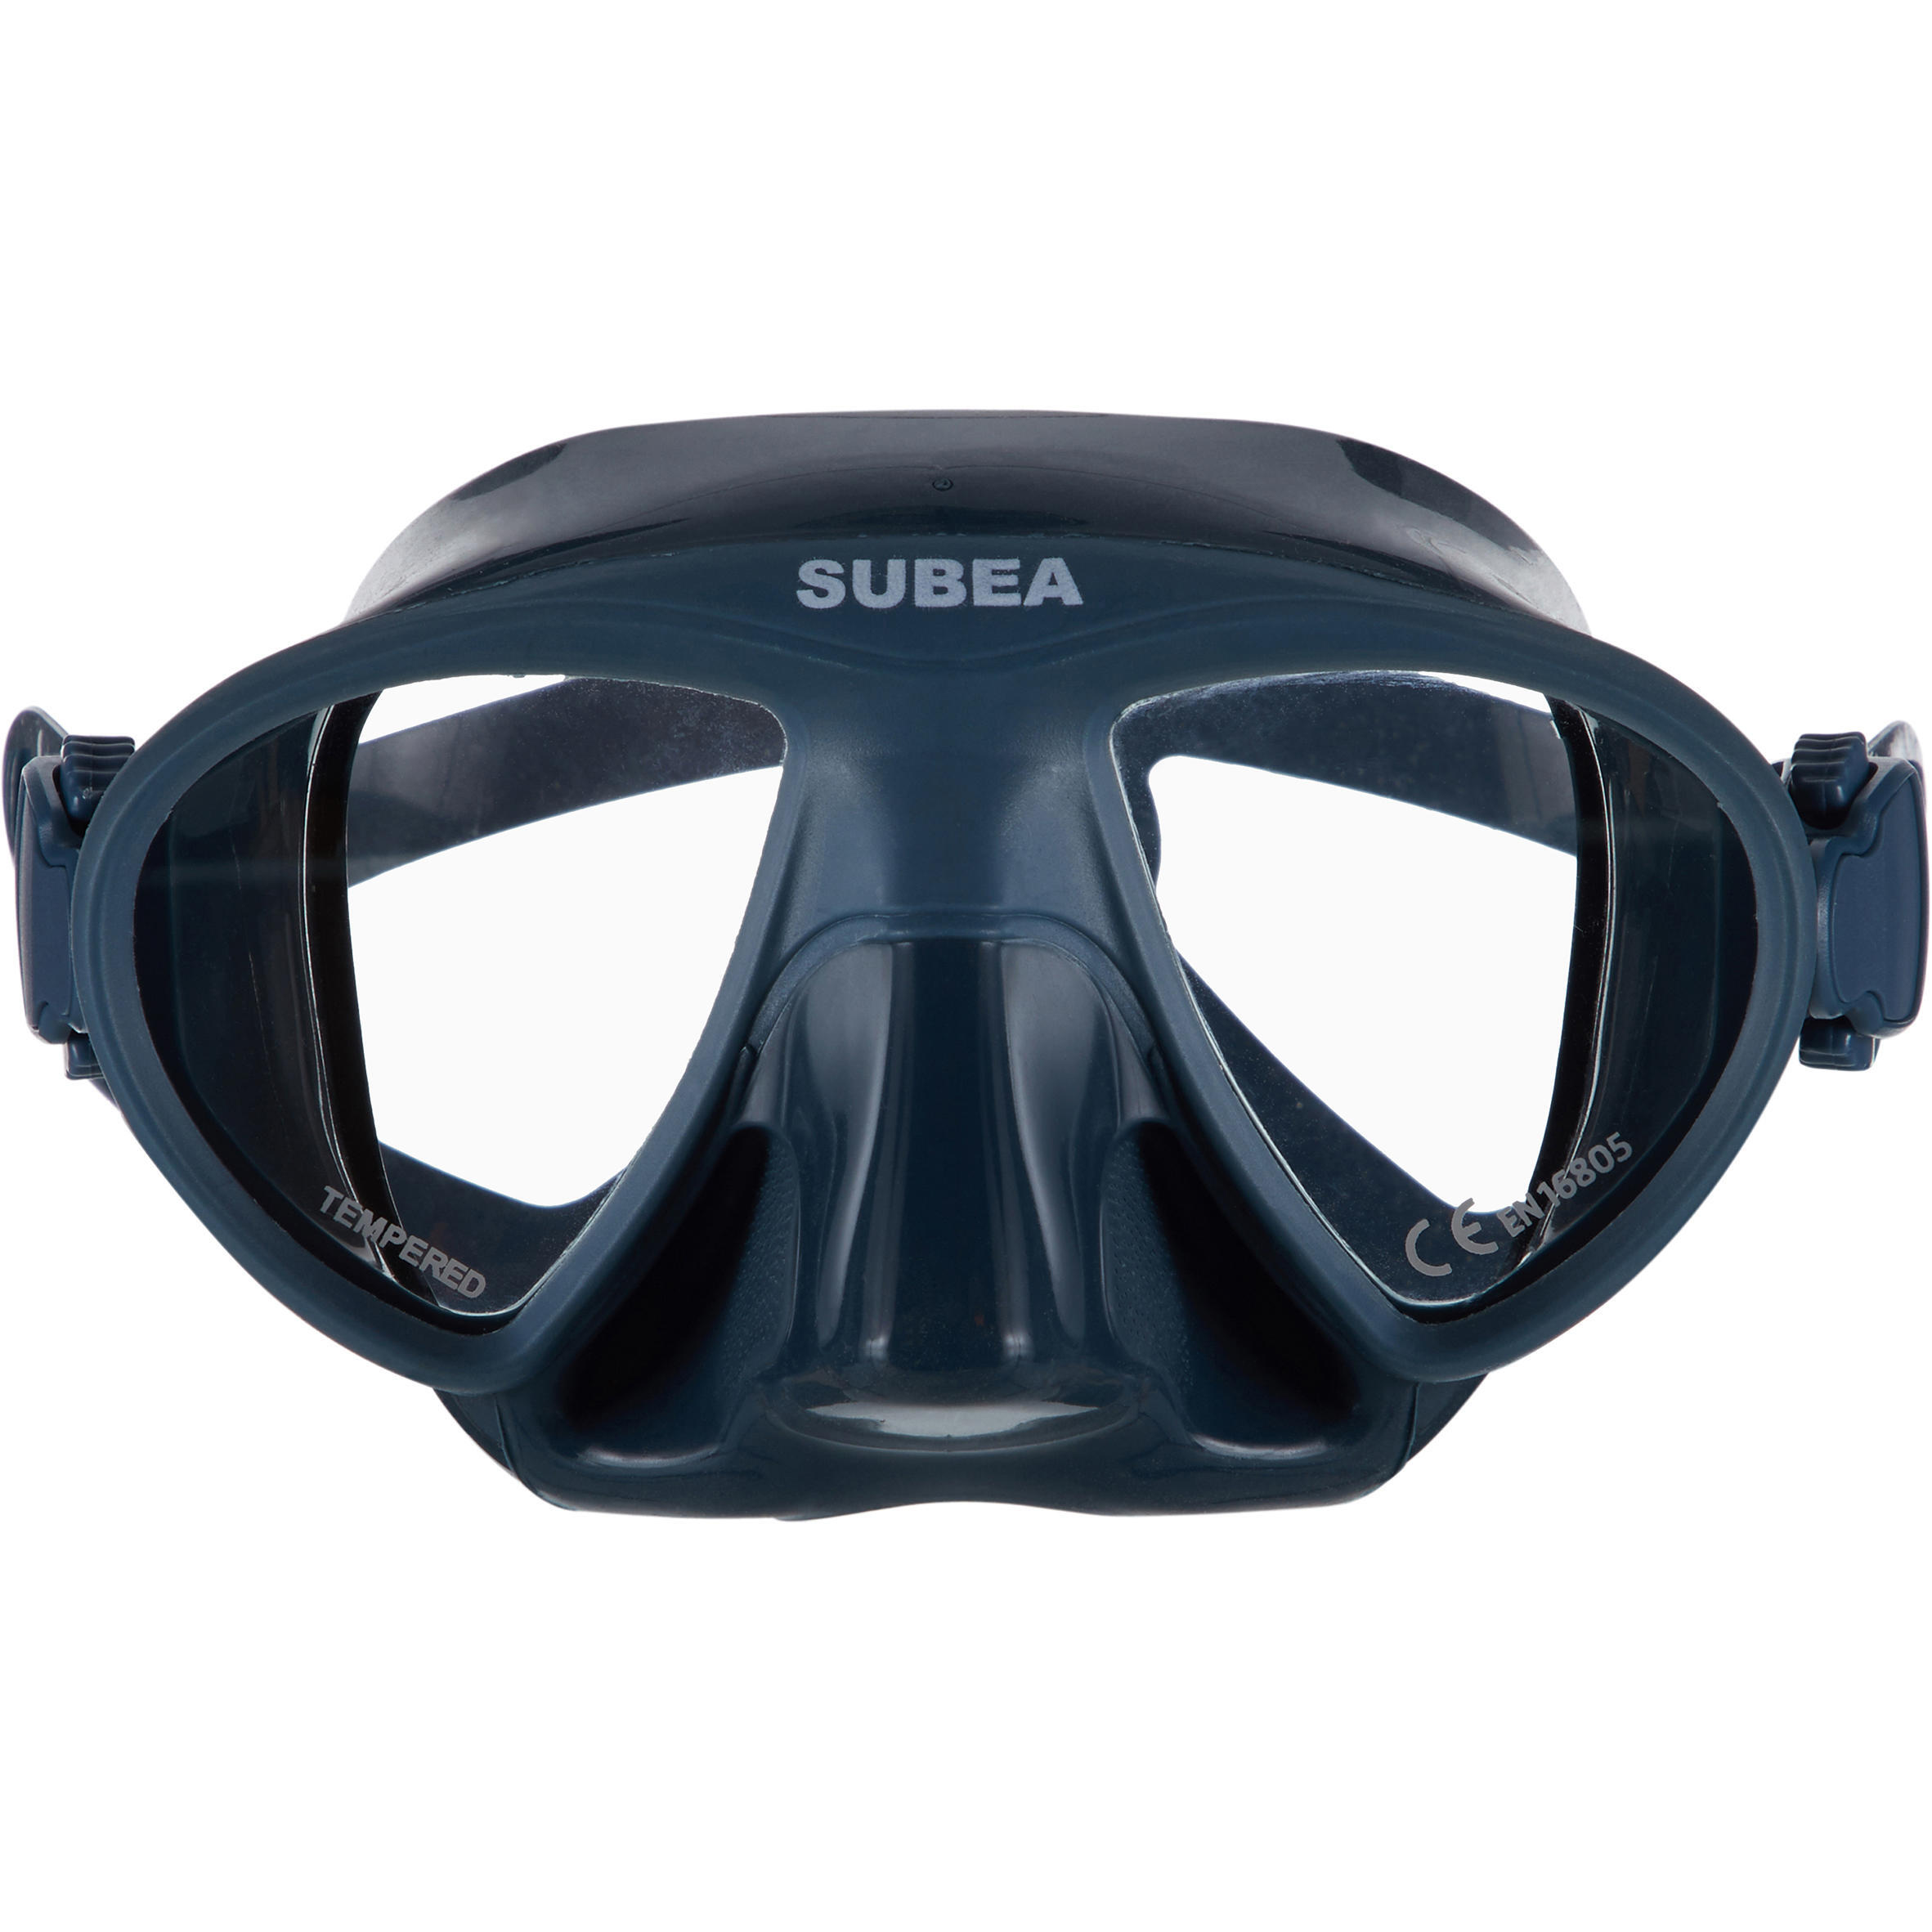 FRD 900 Freediving mask small volume - storm grey 3/9